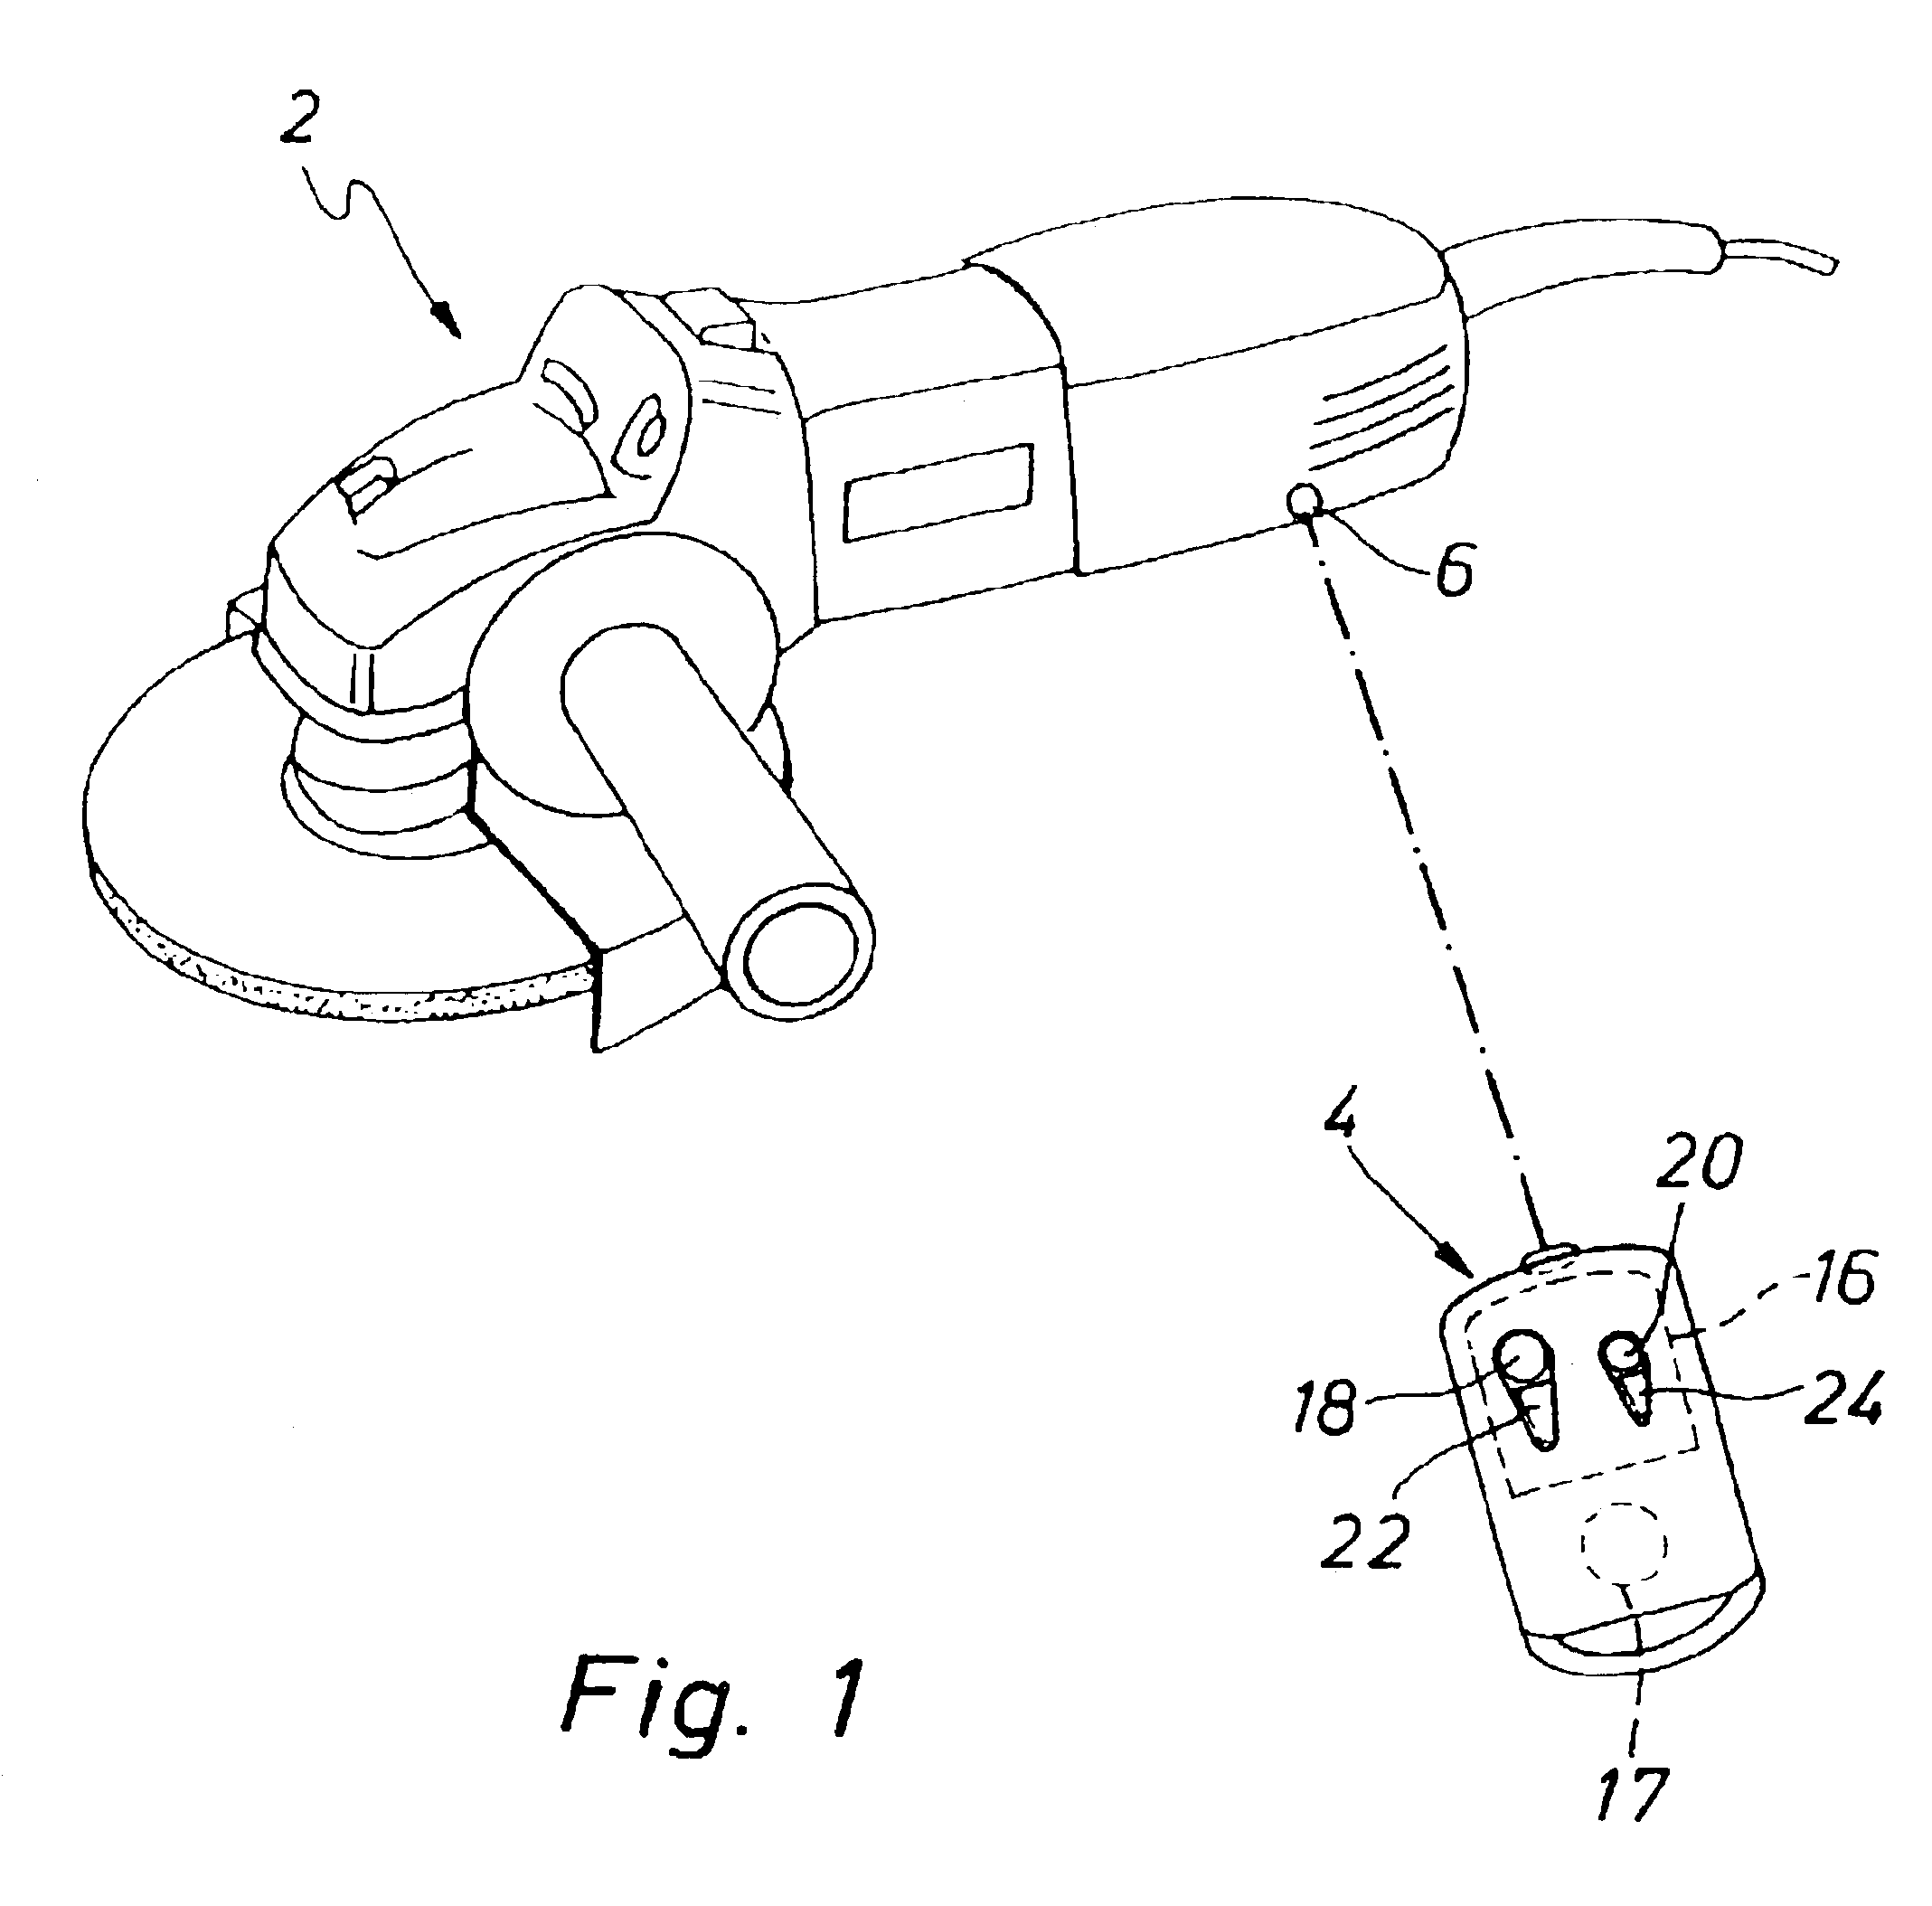 Electrical hand tool device